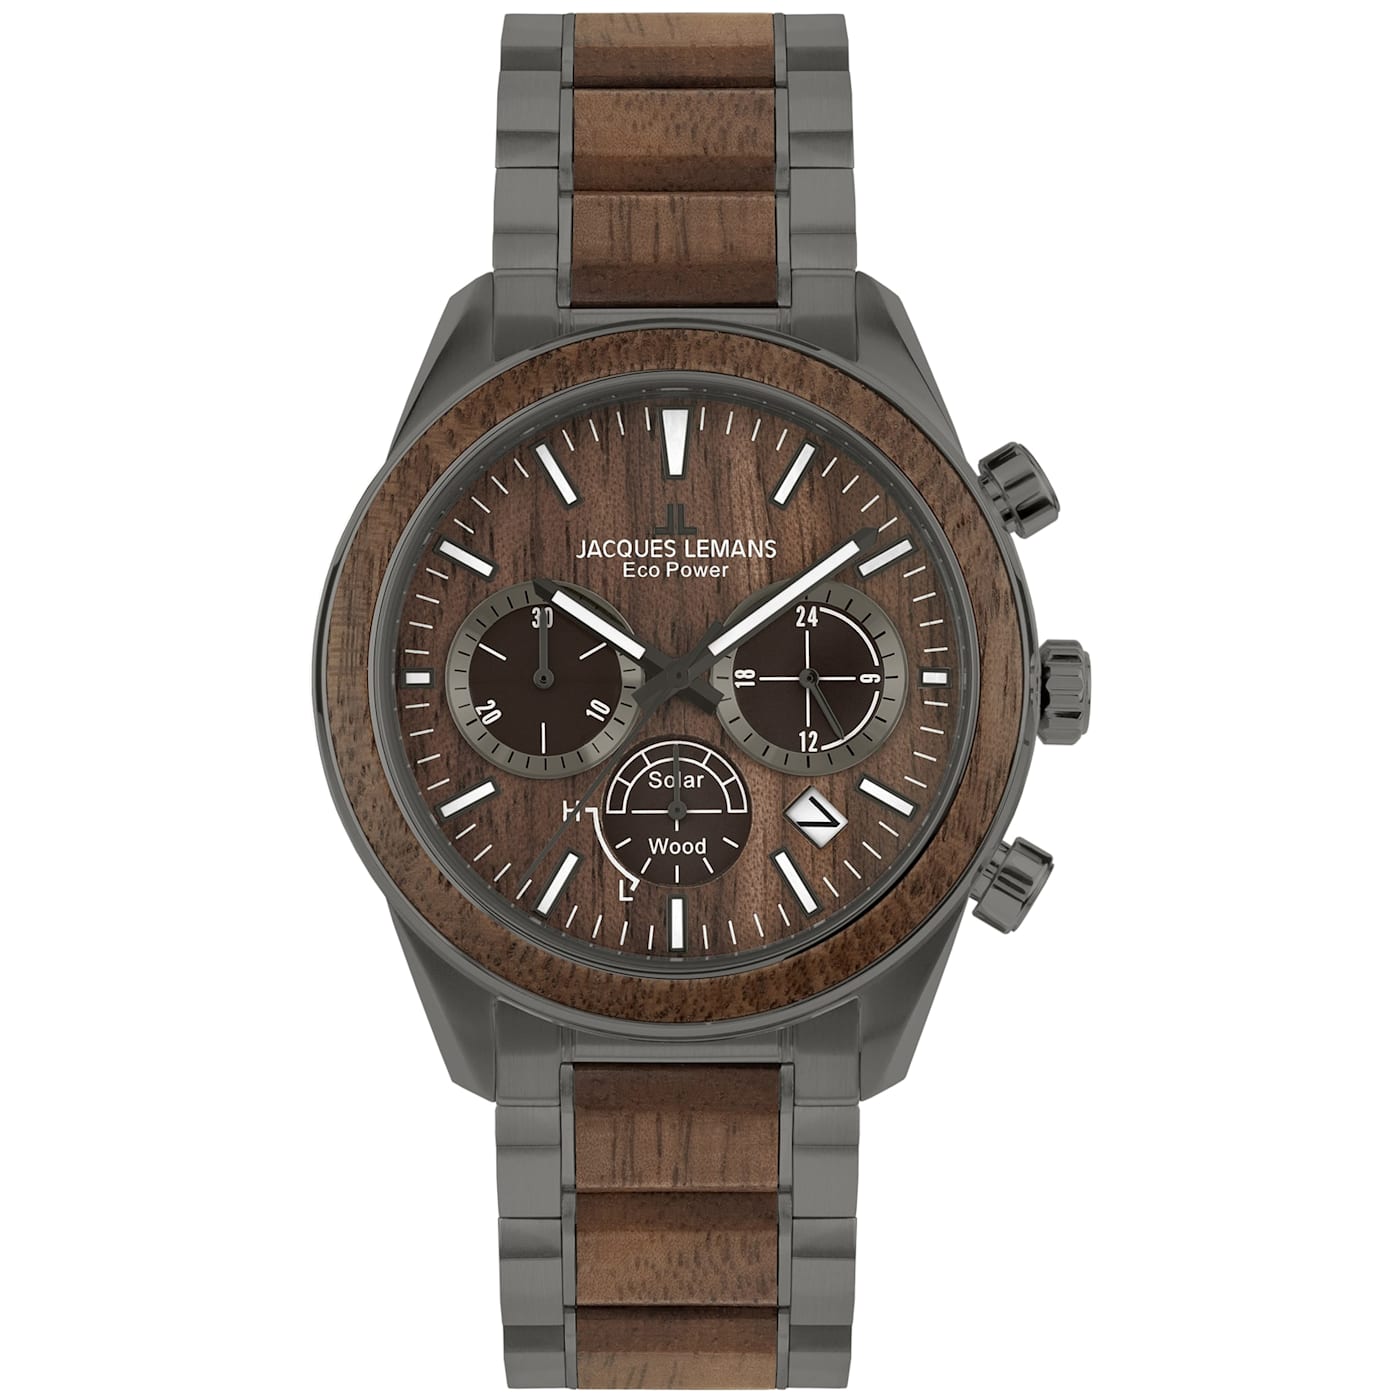 JACQUES LEMANS Power Stainless 1BY38A with - Strap Gray, Chronograph Watch Inlay Steel/Wood 1-2115 Men\'s Eco